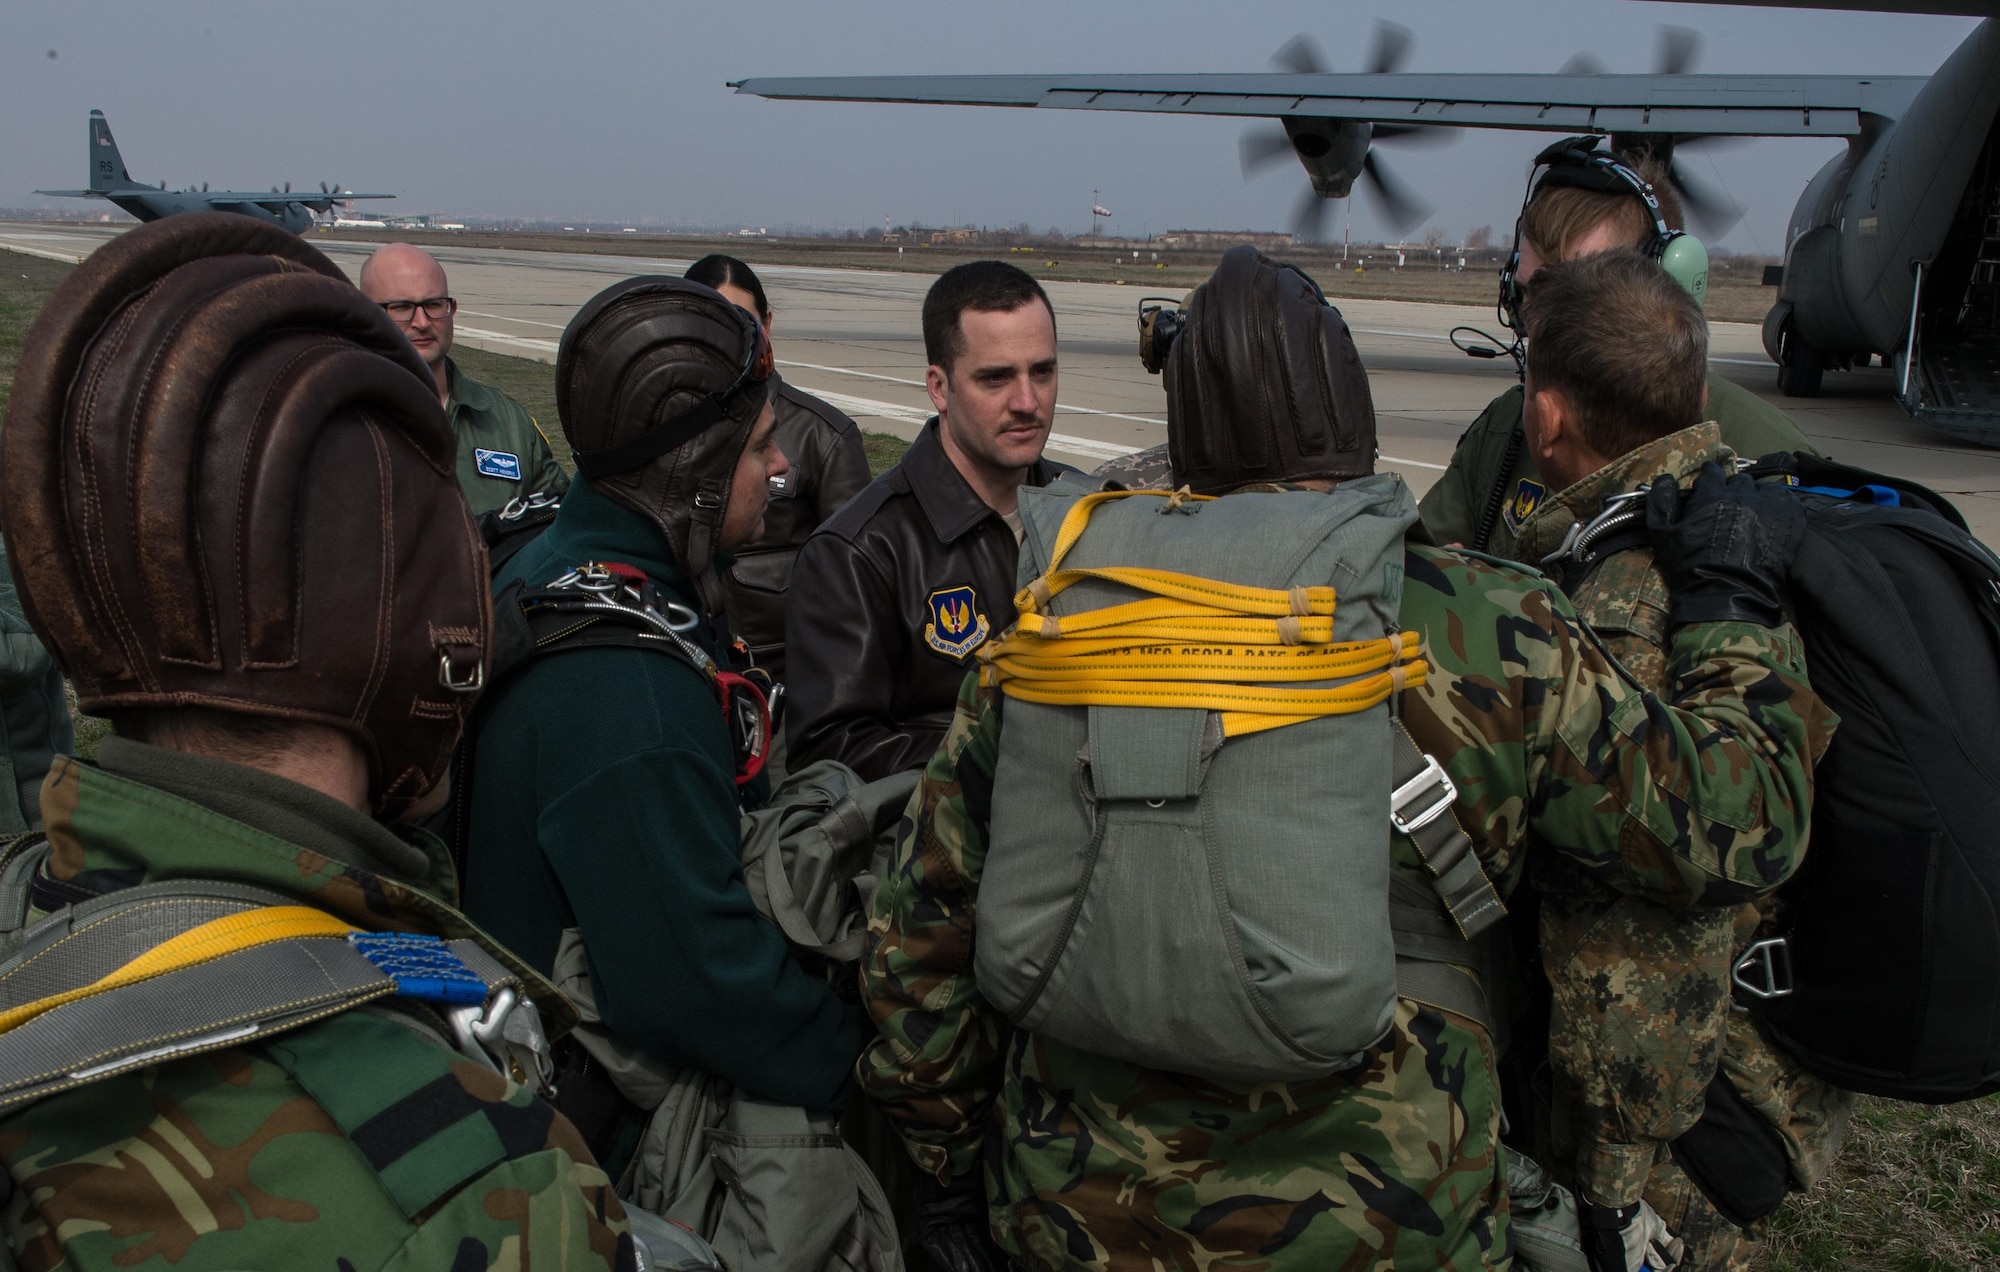 Capt. Tim Vedra, 37th Airlift Squadron C-130J Super Hercules pilot and aircraft commander, discusses an aircraft brief with Bulgarian paratroopers during Exercise Thracian Spring 17 at Plovdiv Regional Airport, Bulgaria, March 15, 2017. The 37th AS air crew and 435th Contingency Response Group jump masters from Ramstein Air Base, Germany, worked directly with the paratroopers to conduct tactical flight training. The training enables the U.S. to maintain a critical mobility hub in support of U.S. training and mission objectives while strengthening relations. (U.S. Air Force photo by Staff Sgt. Nesha Humes)